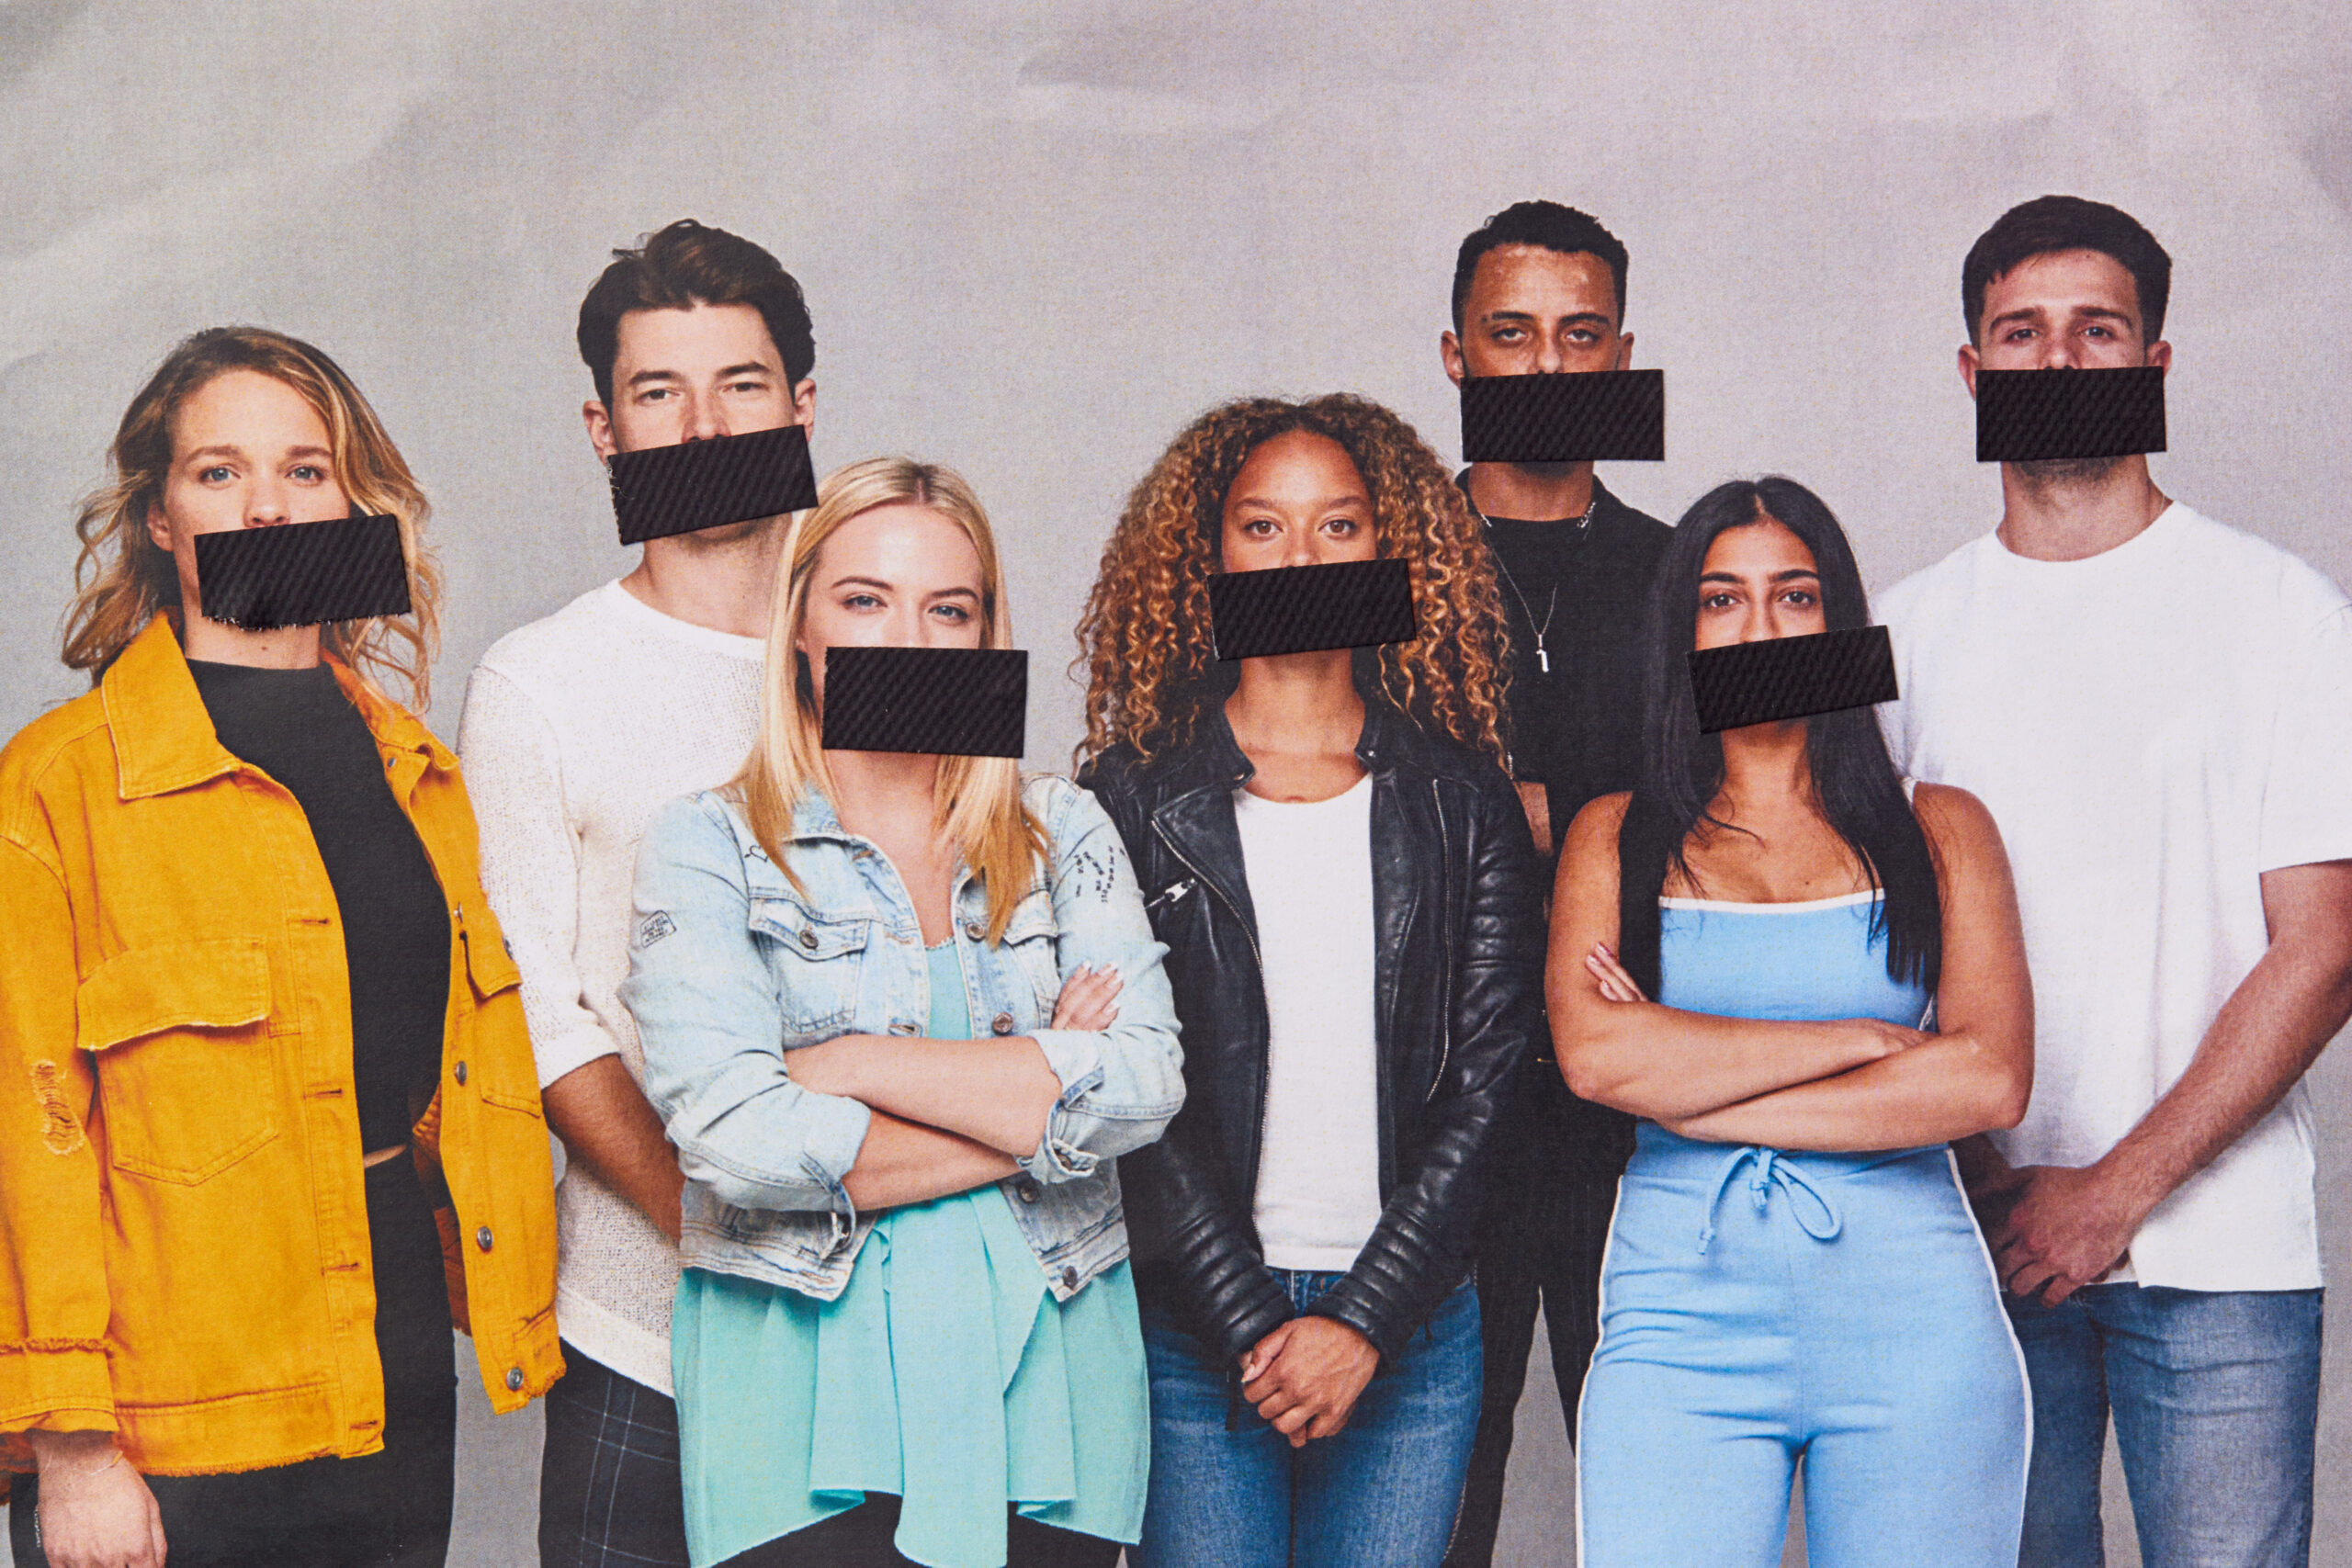 Freedom Of Speech Group Of Young People With Mouths Covered With Tape